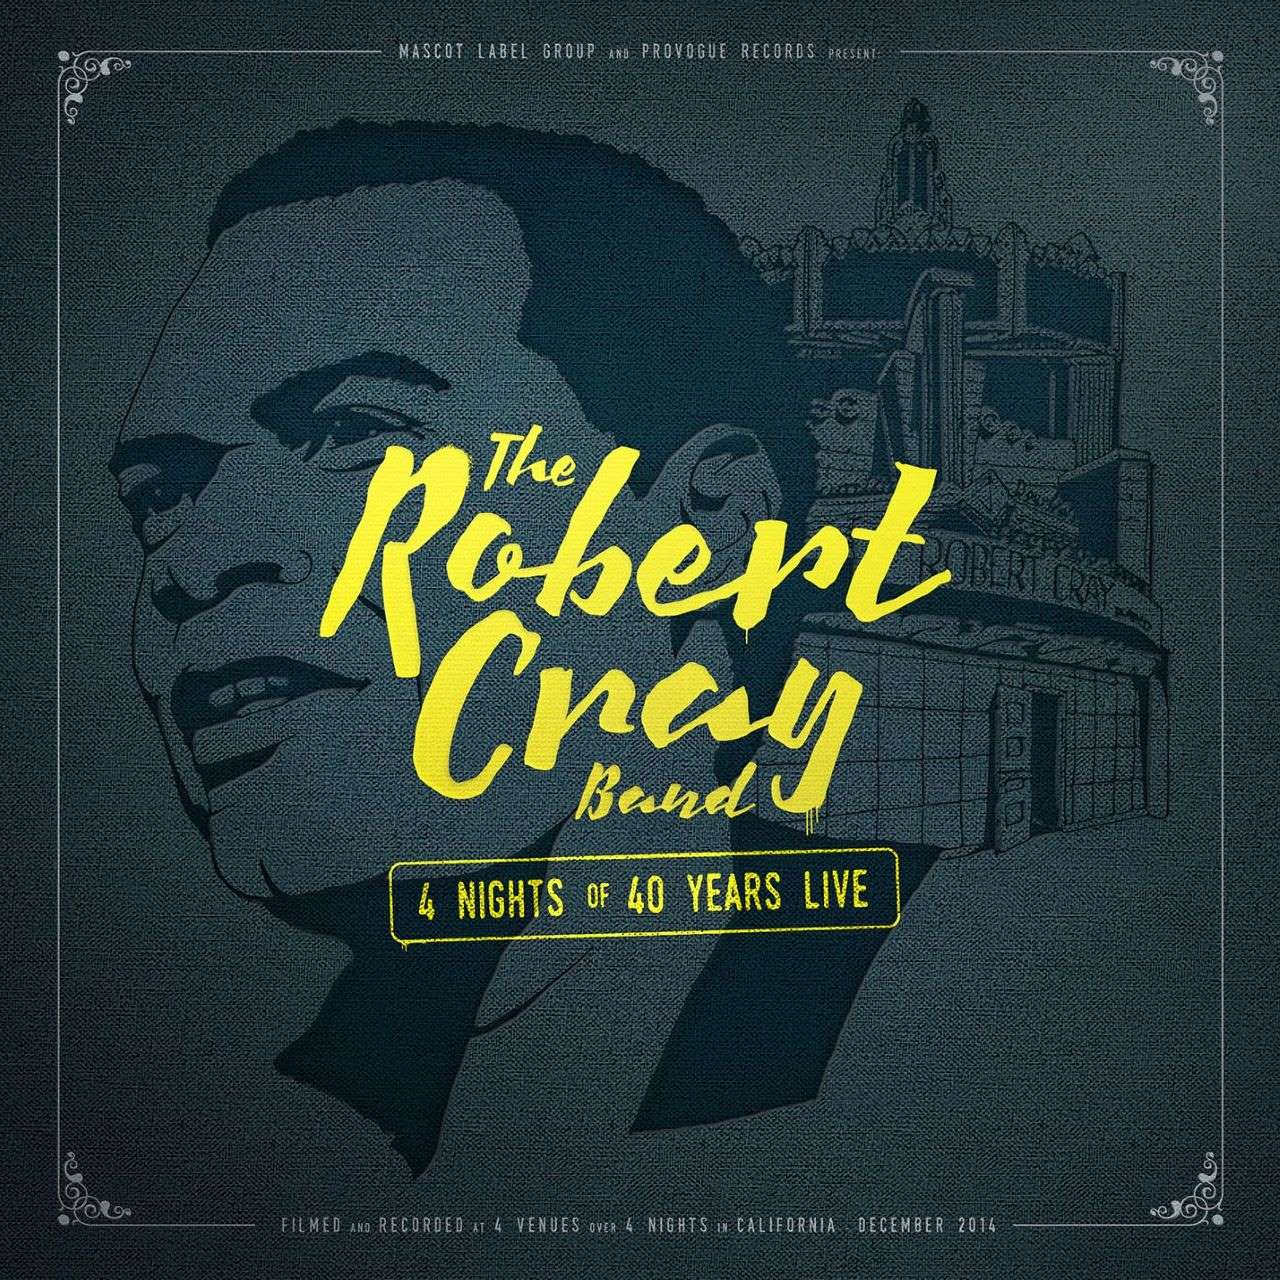 Robert Cray Band – 4 Nights Of 40 Years Live cover album